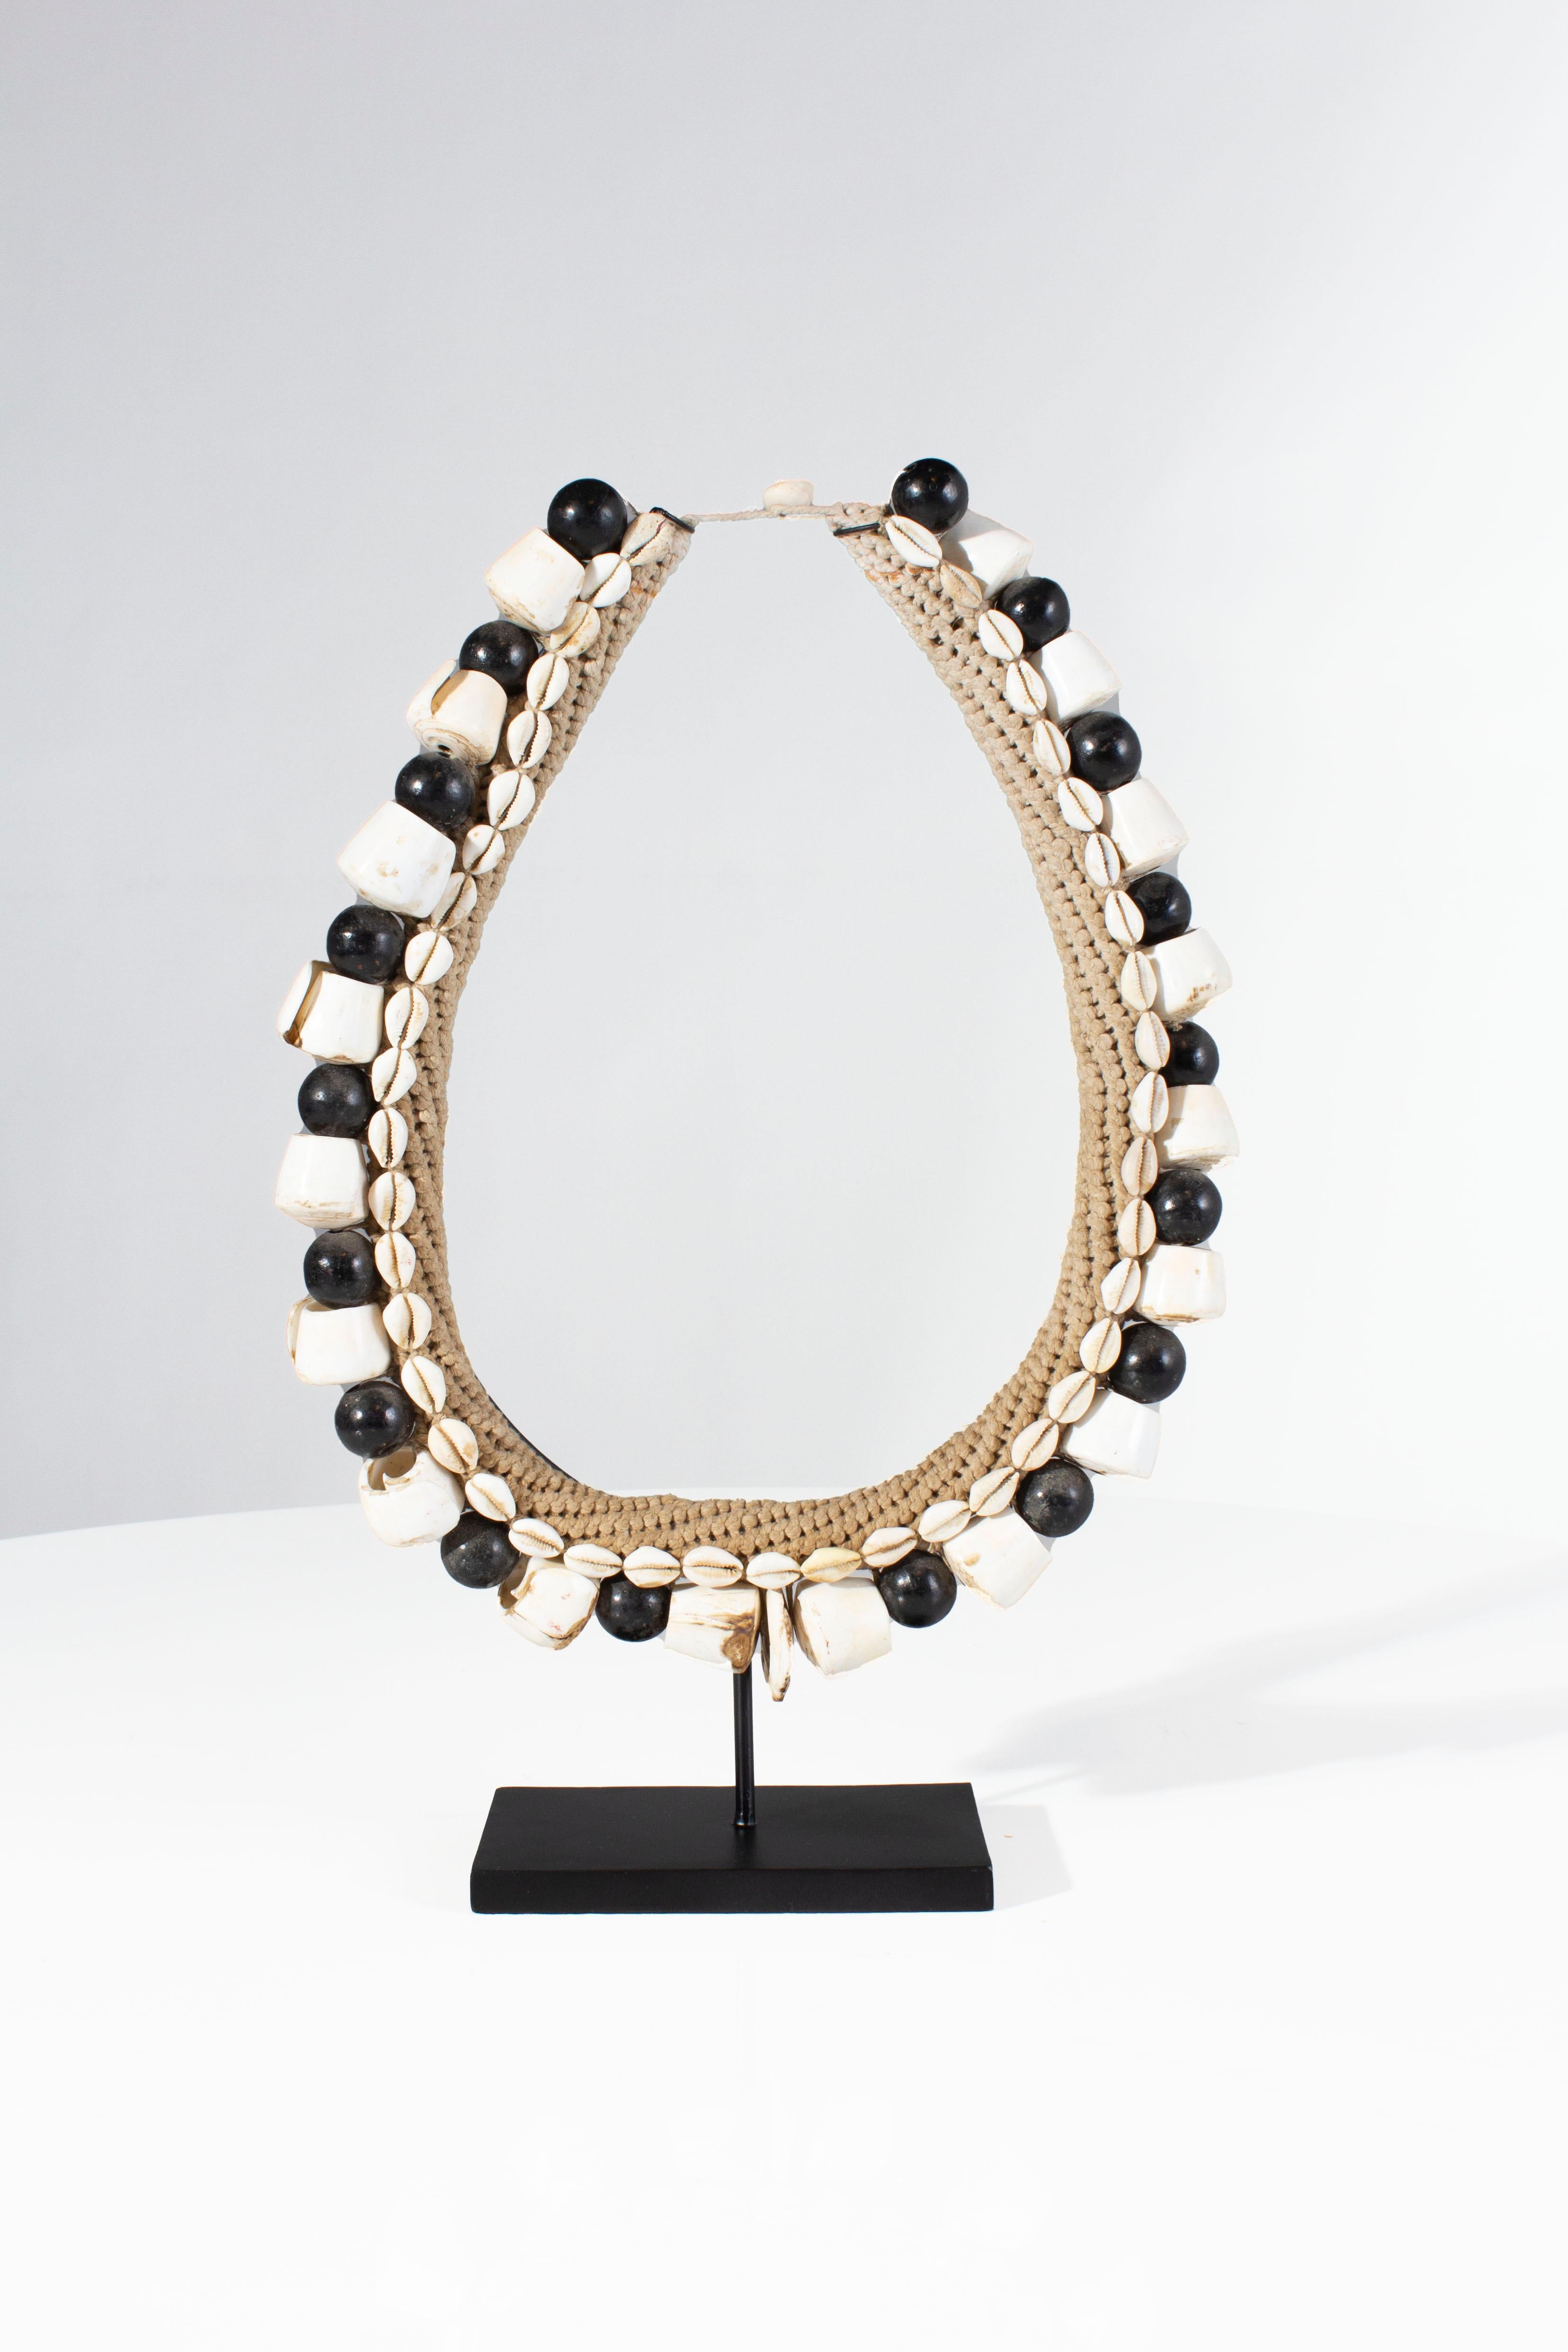 Black shell necklace accessory on metal stand.

One of a kind sourced from Belgium.

2 available.